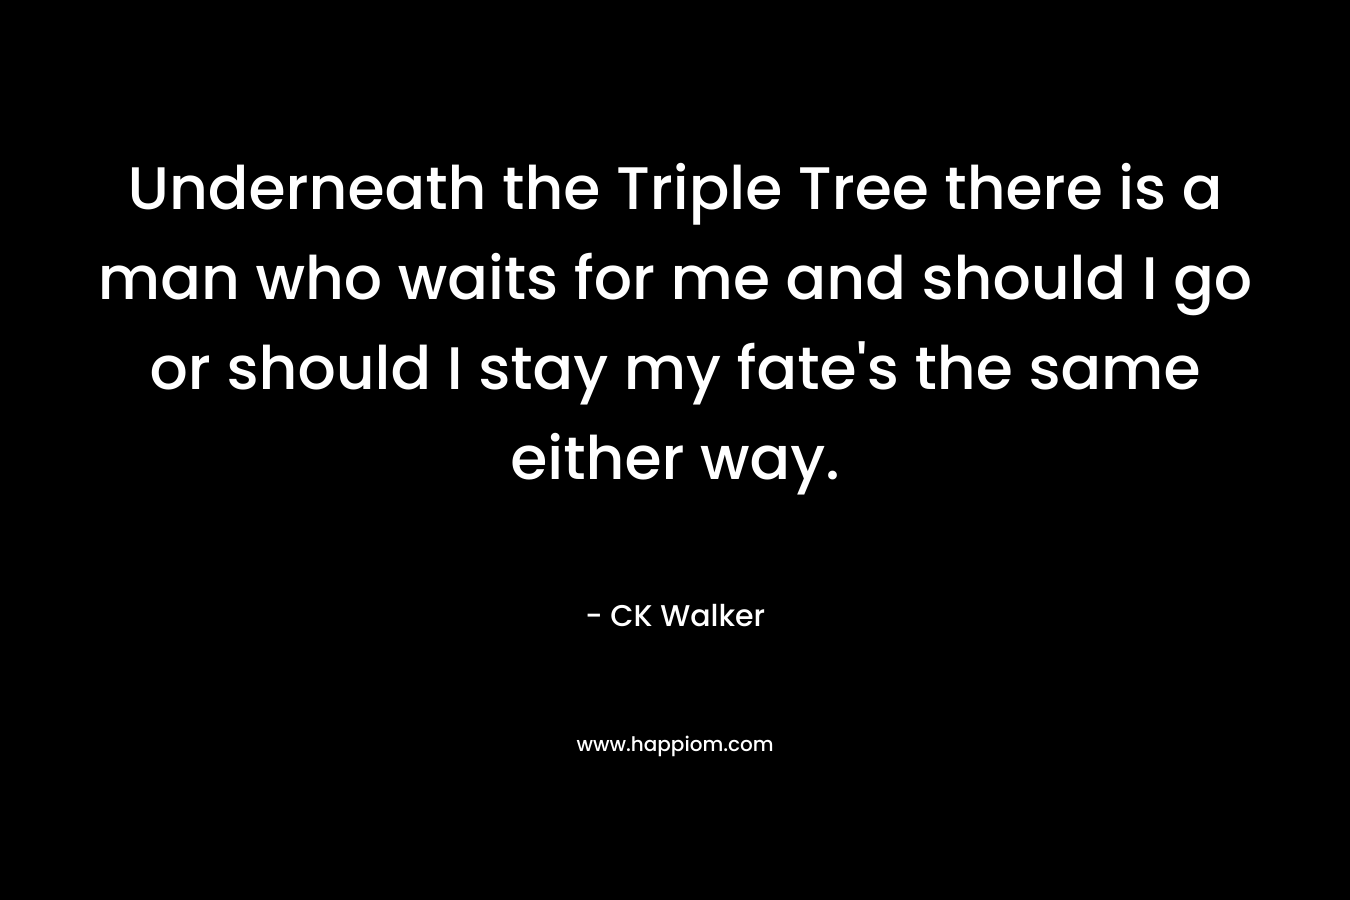 Underneath the Triple Tree there is a man who waits for me and should I go or should I stay my fate's the same either way.